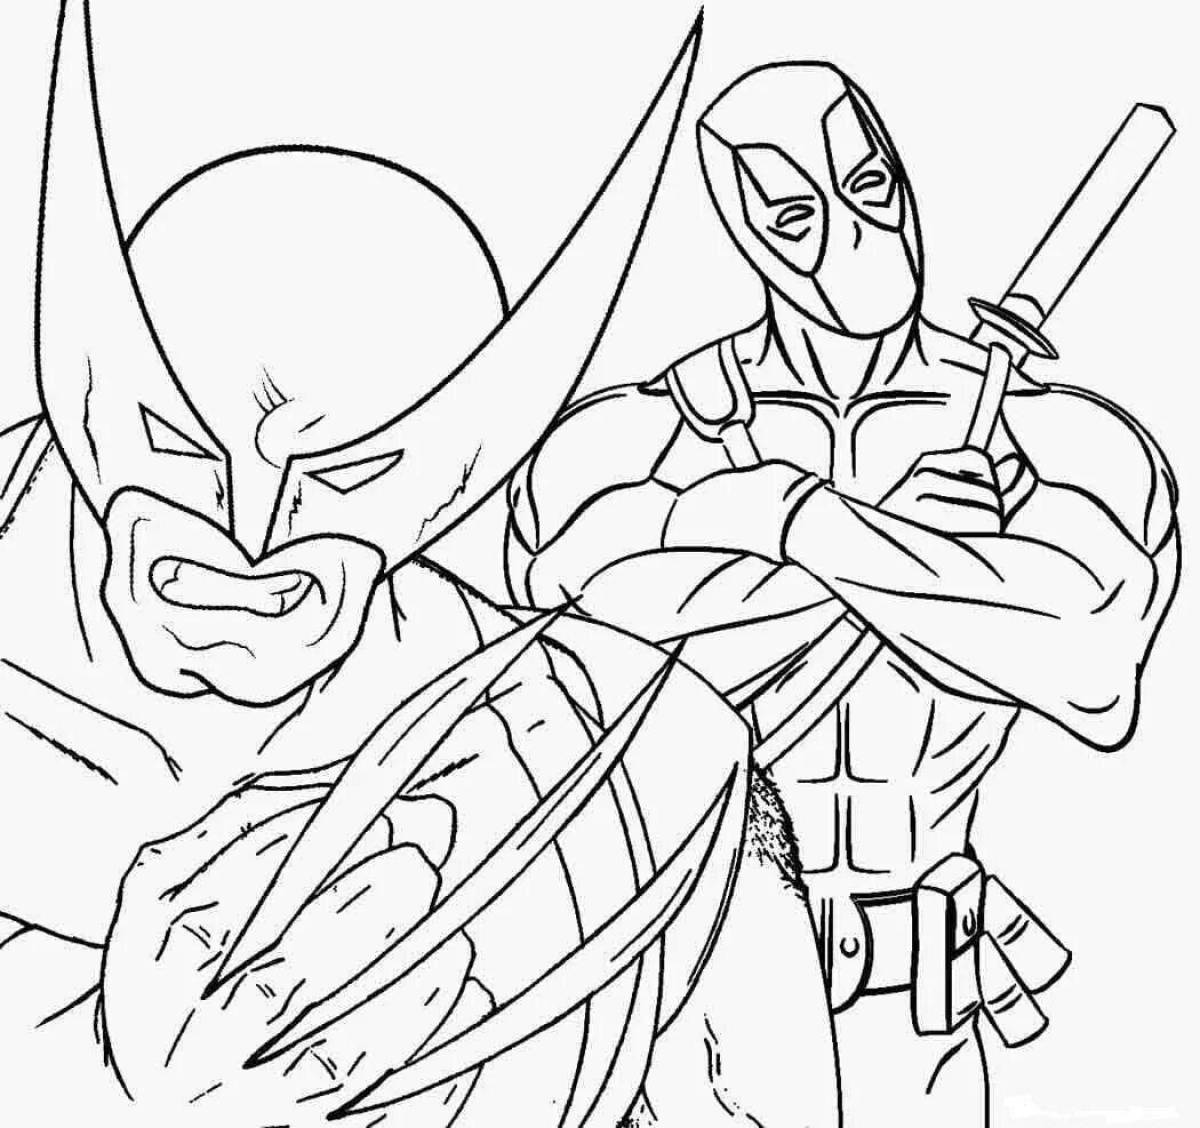 Xavier's amazing coloring page